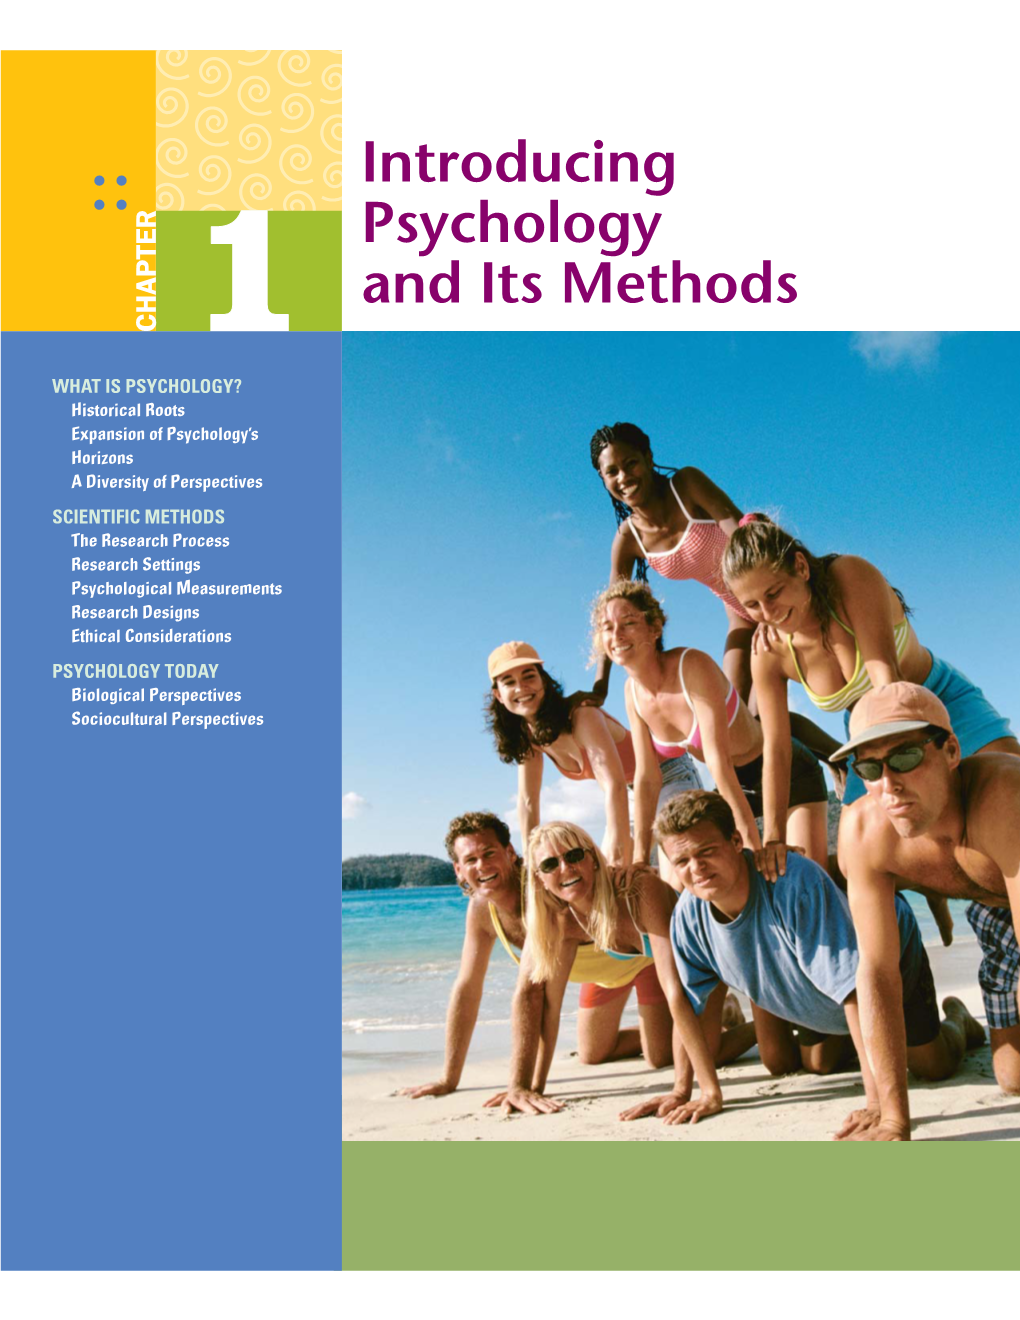 Introducing Psychology and Its Methods